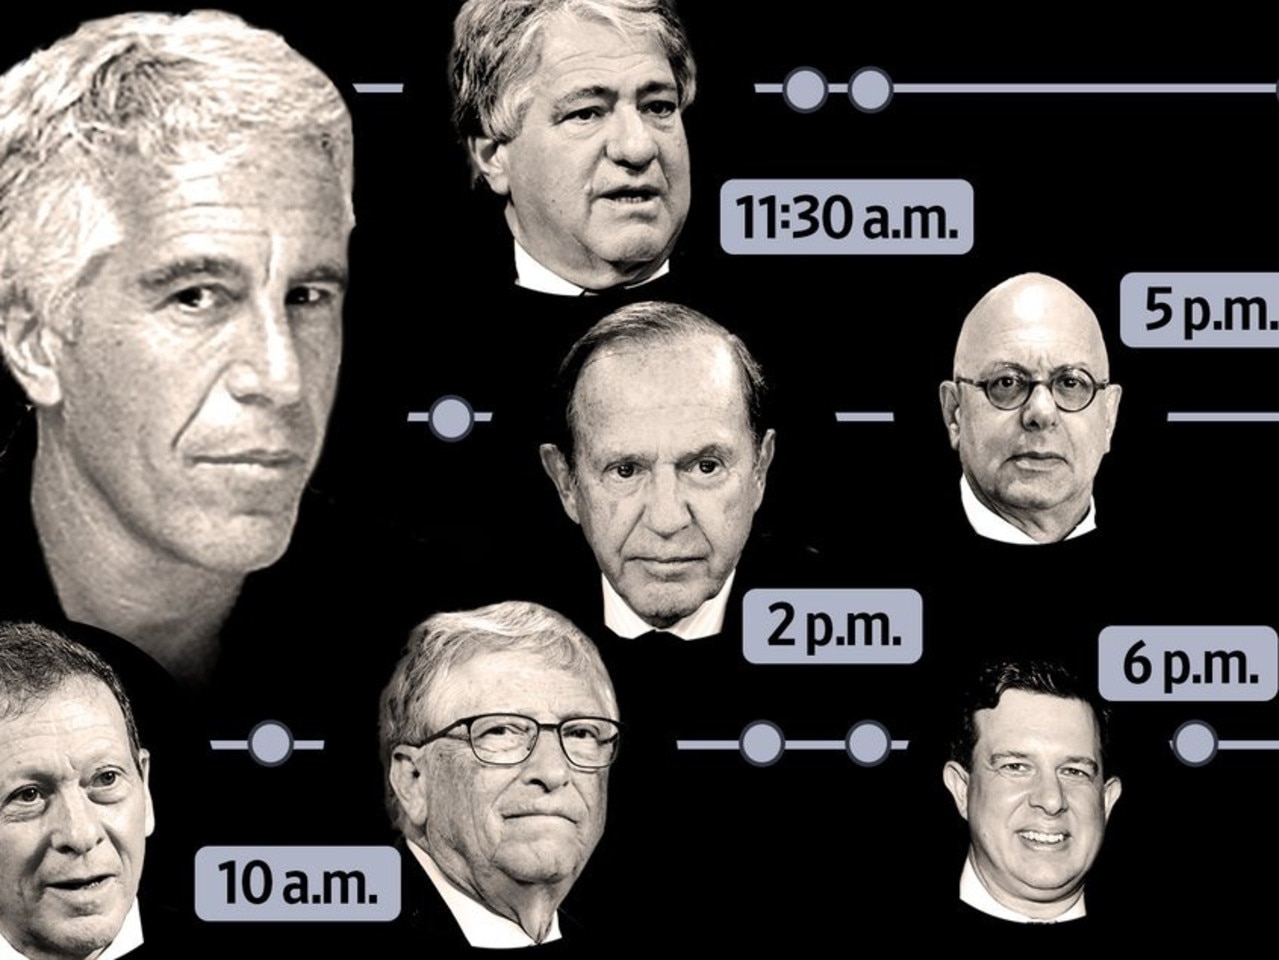 Jeffrey Epstein One day in calendar shows meetings with some of